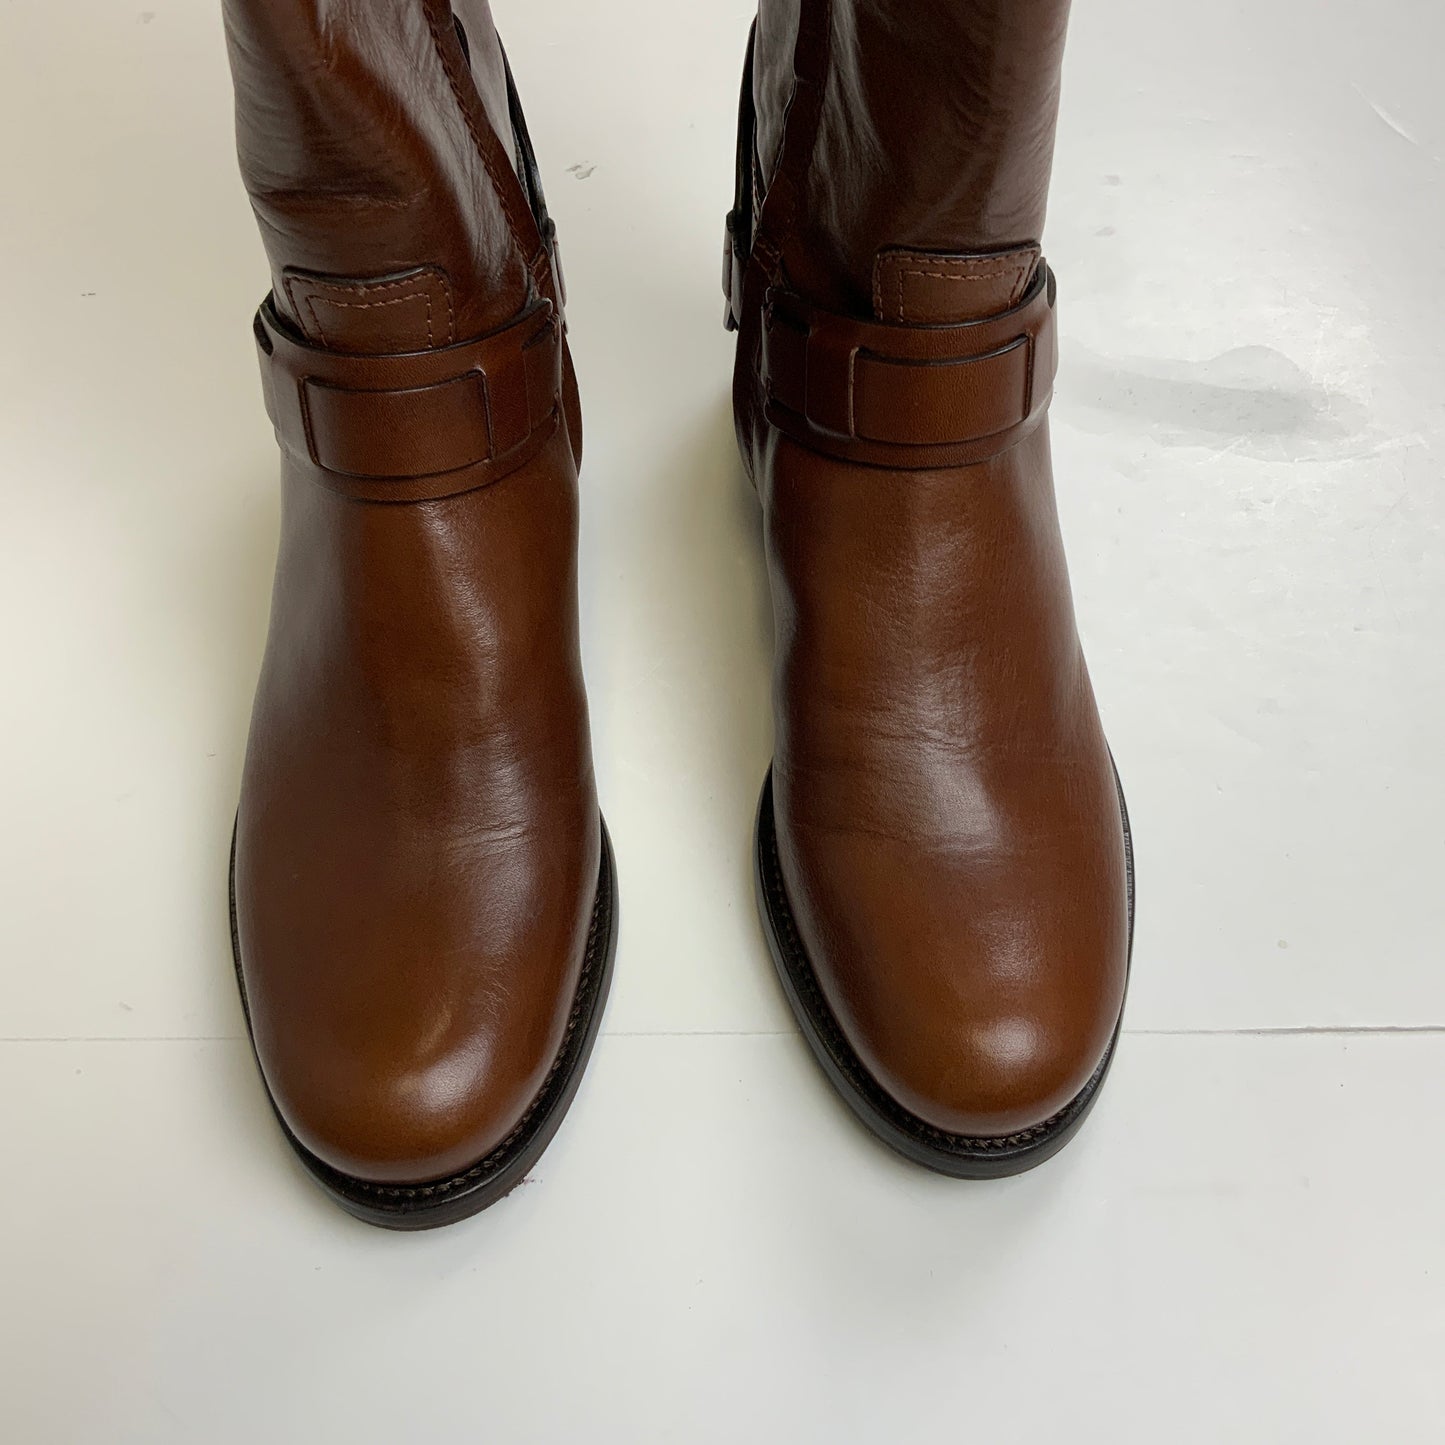 Boots Designer By Tory Burch  Size: 6.5